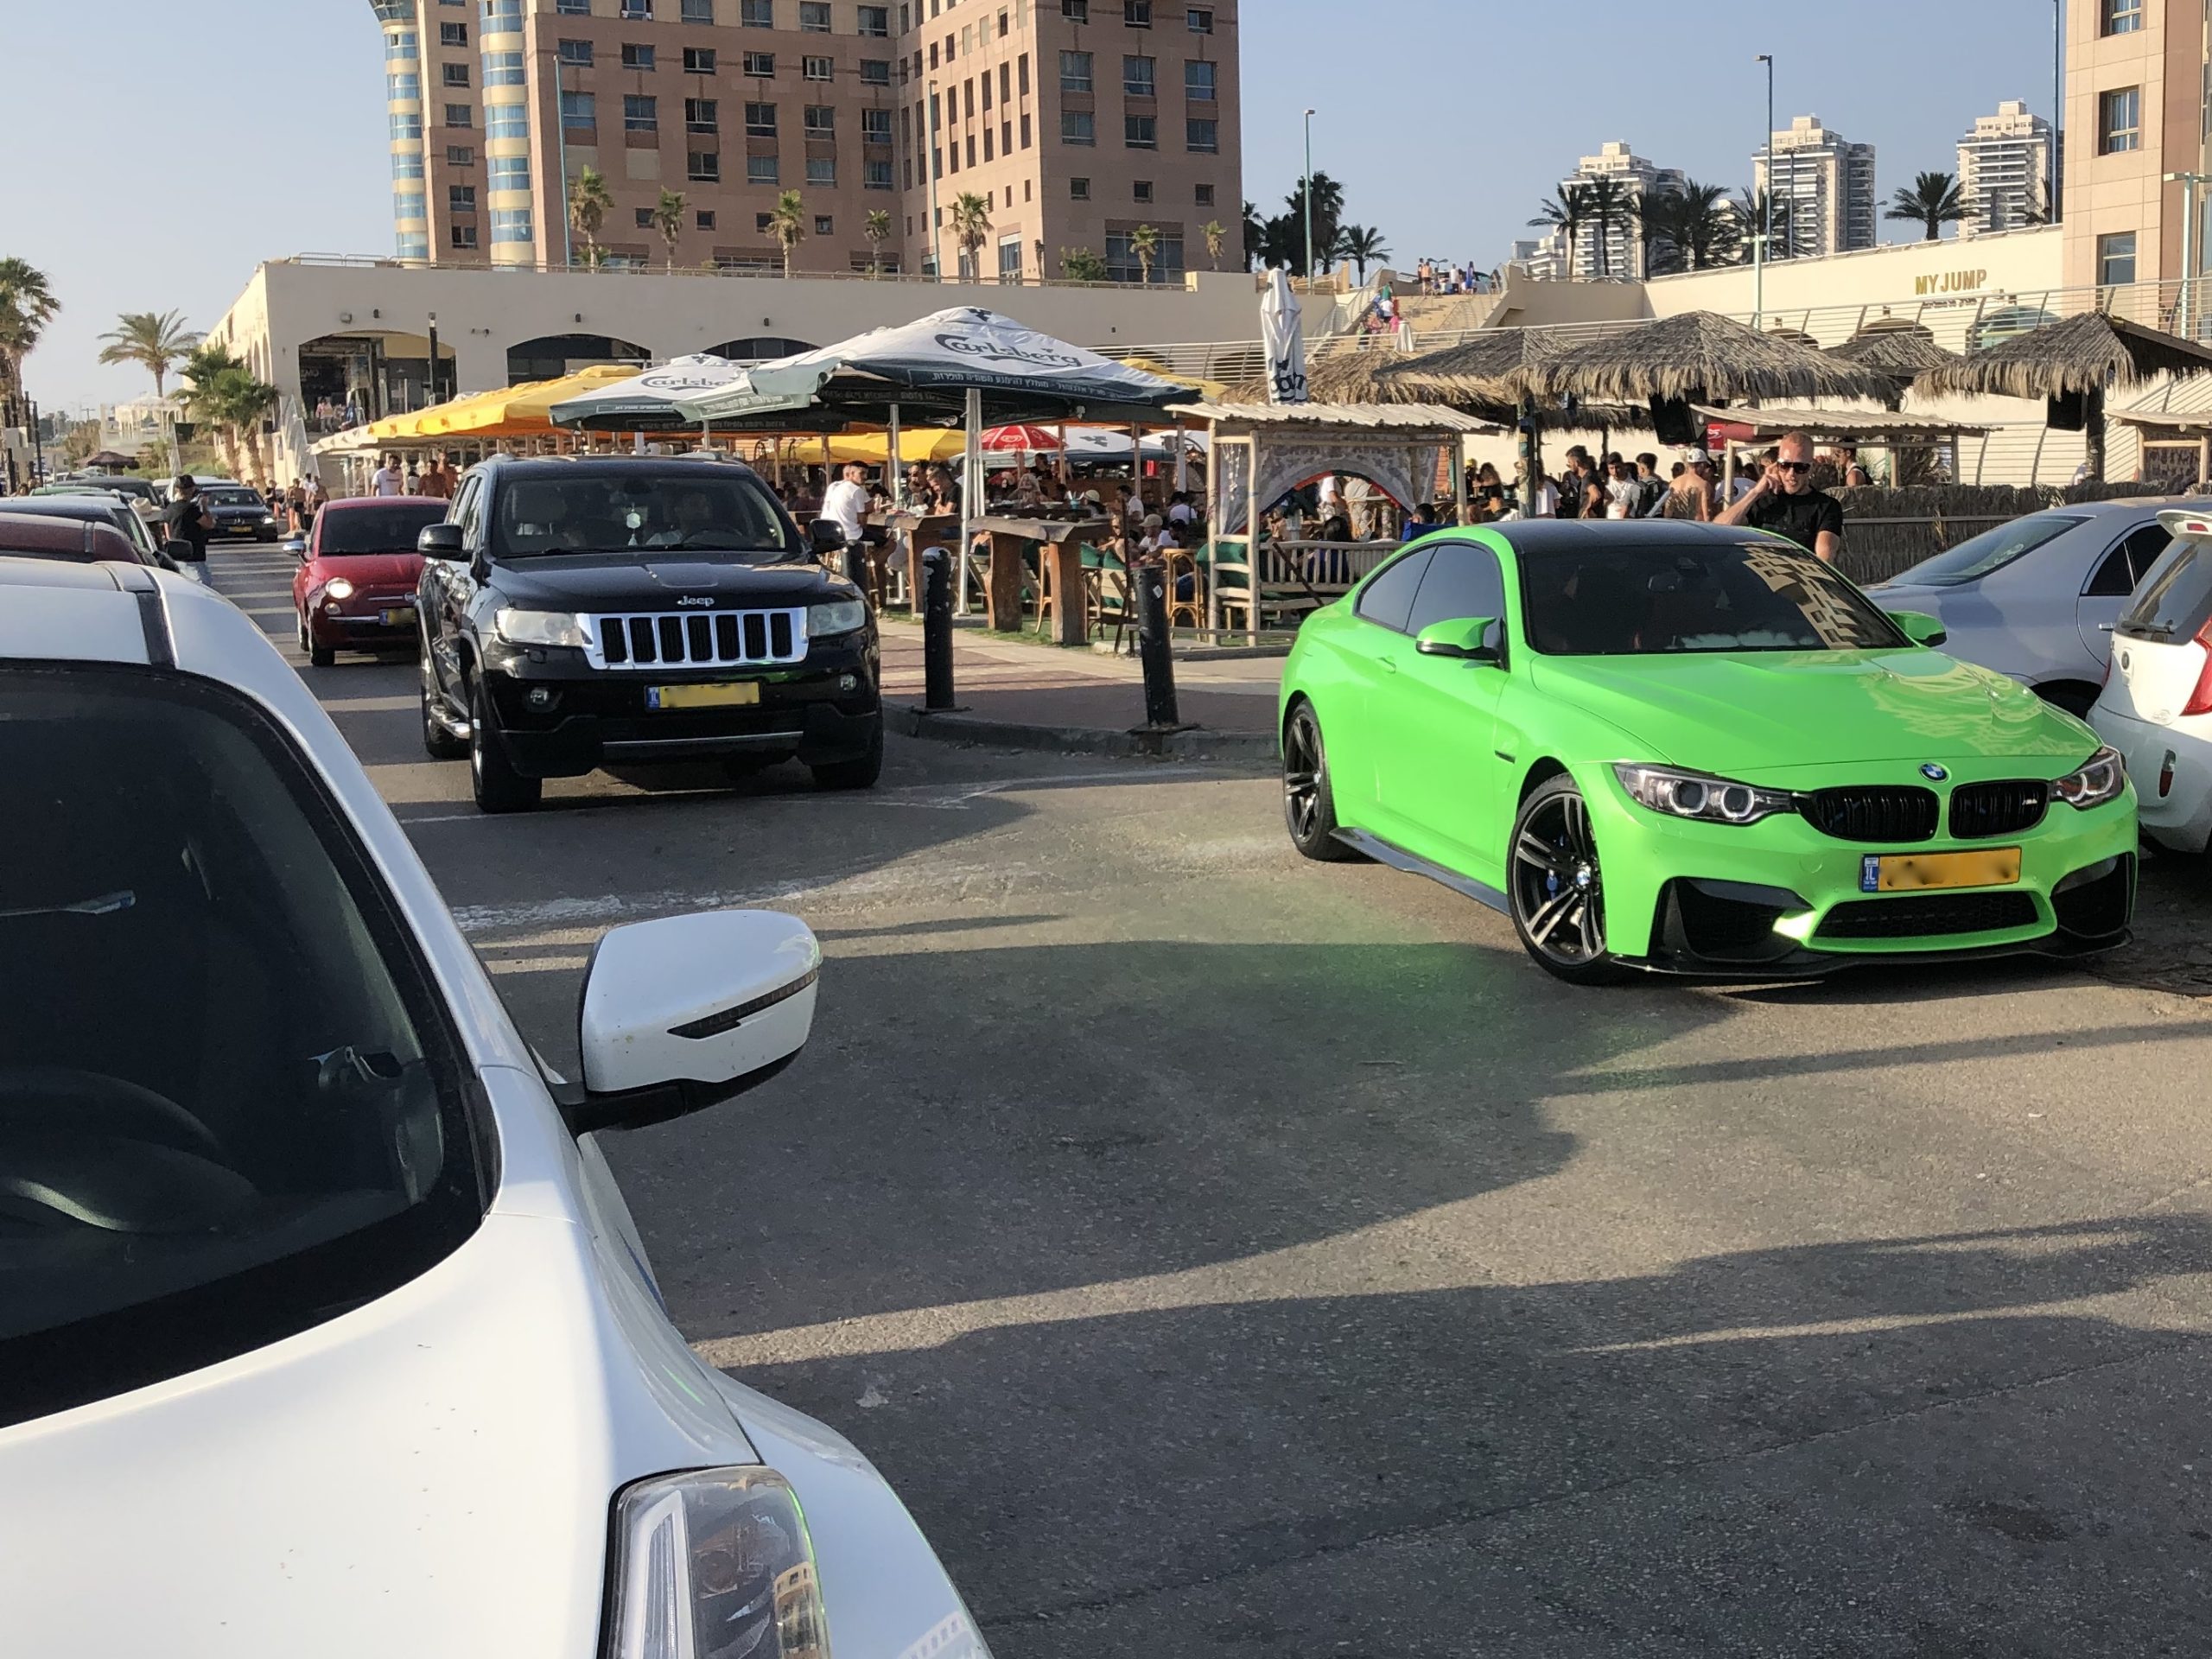 Luxury Cars Becoming a Common View in Israel